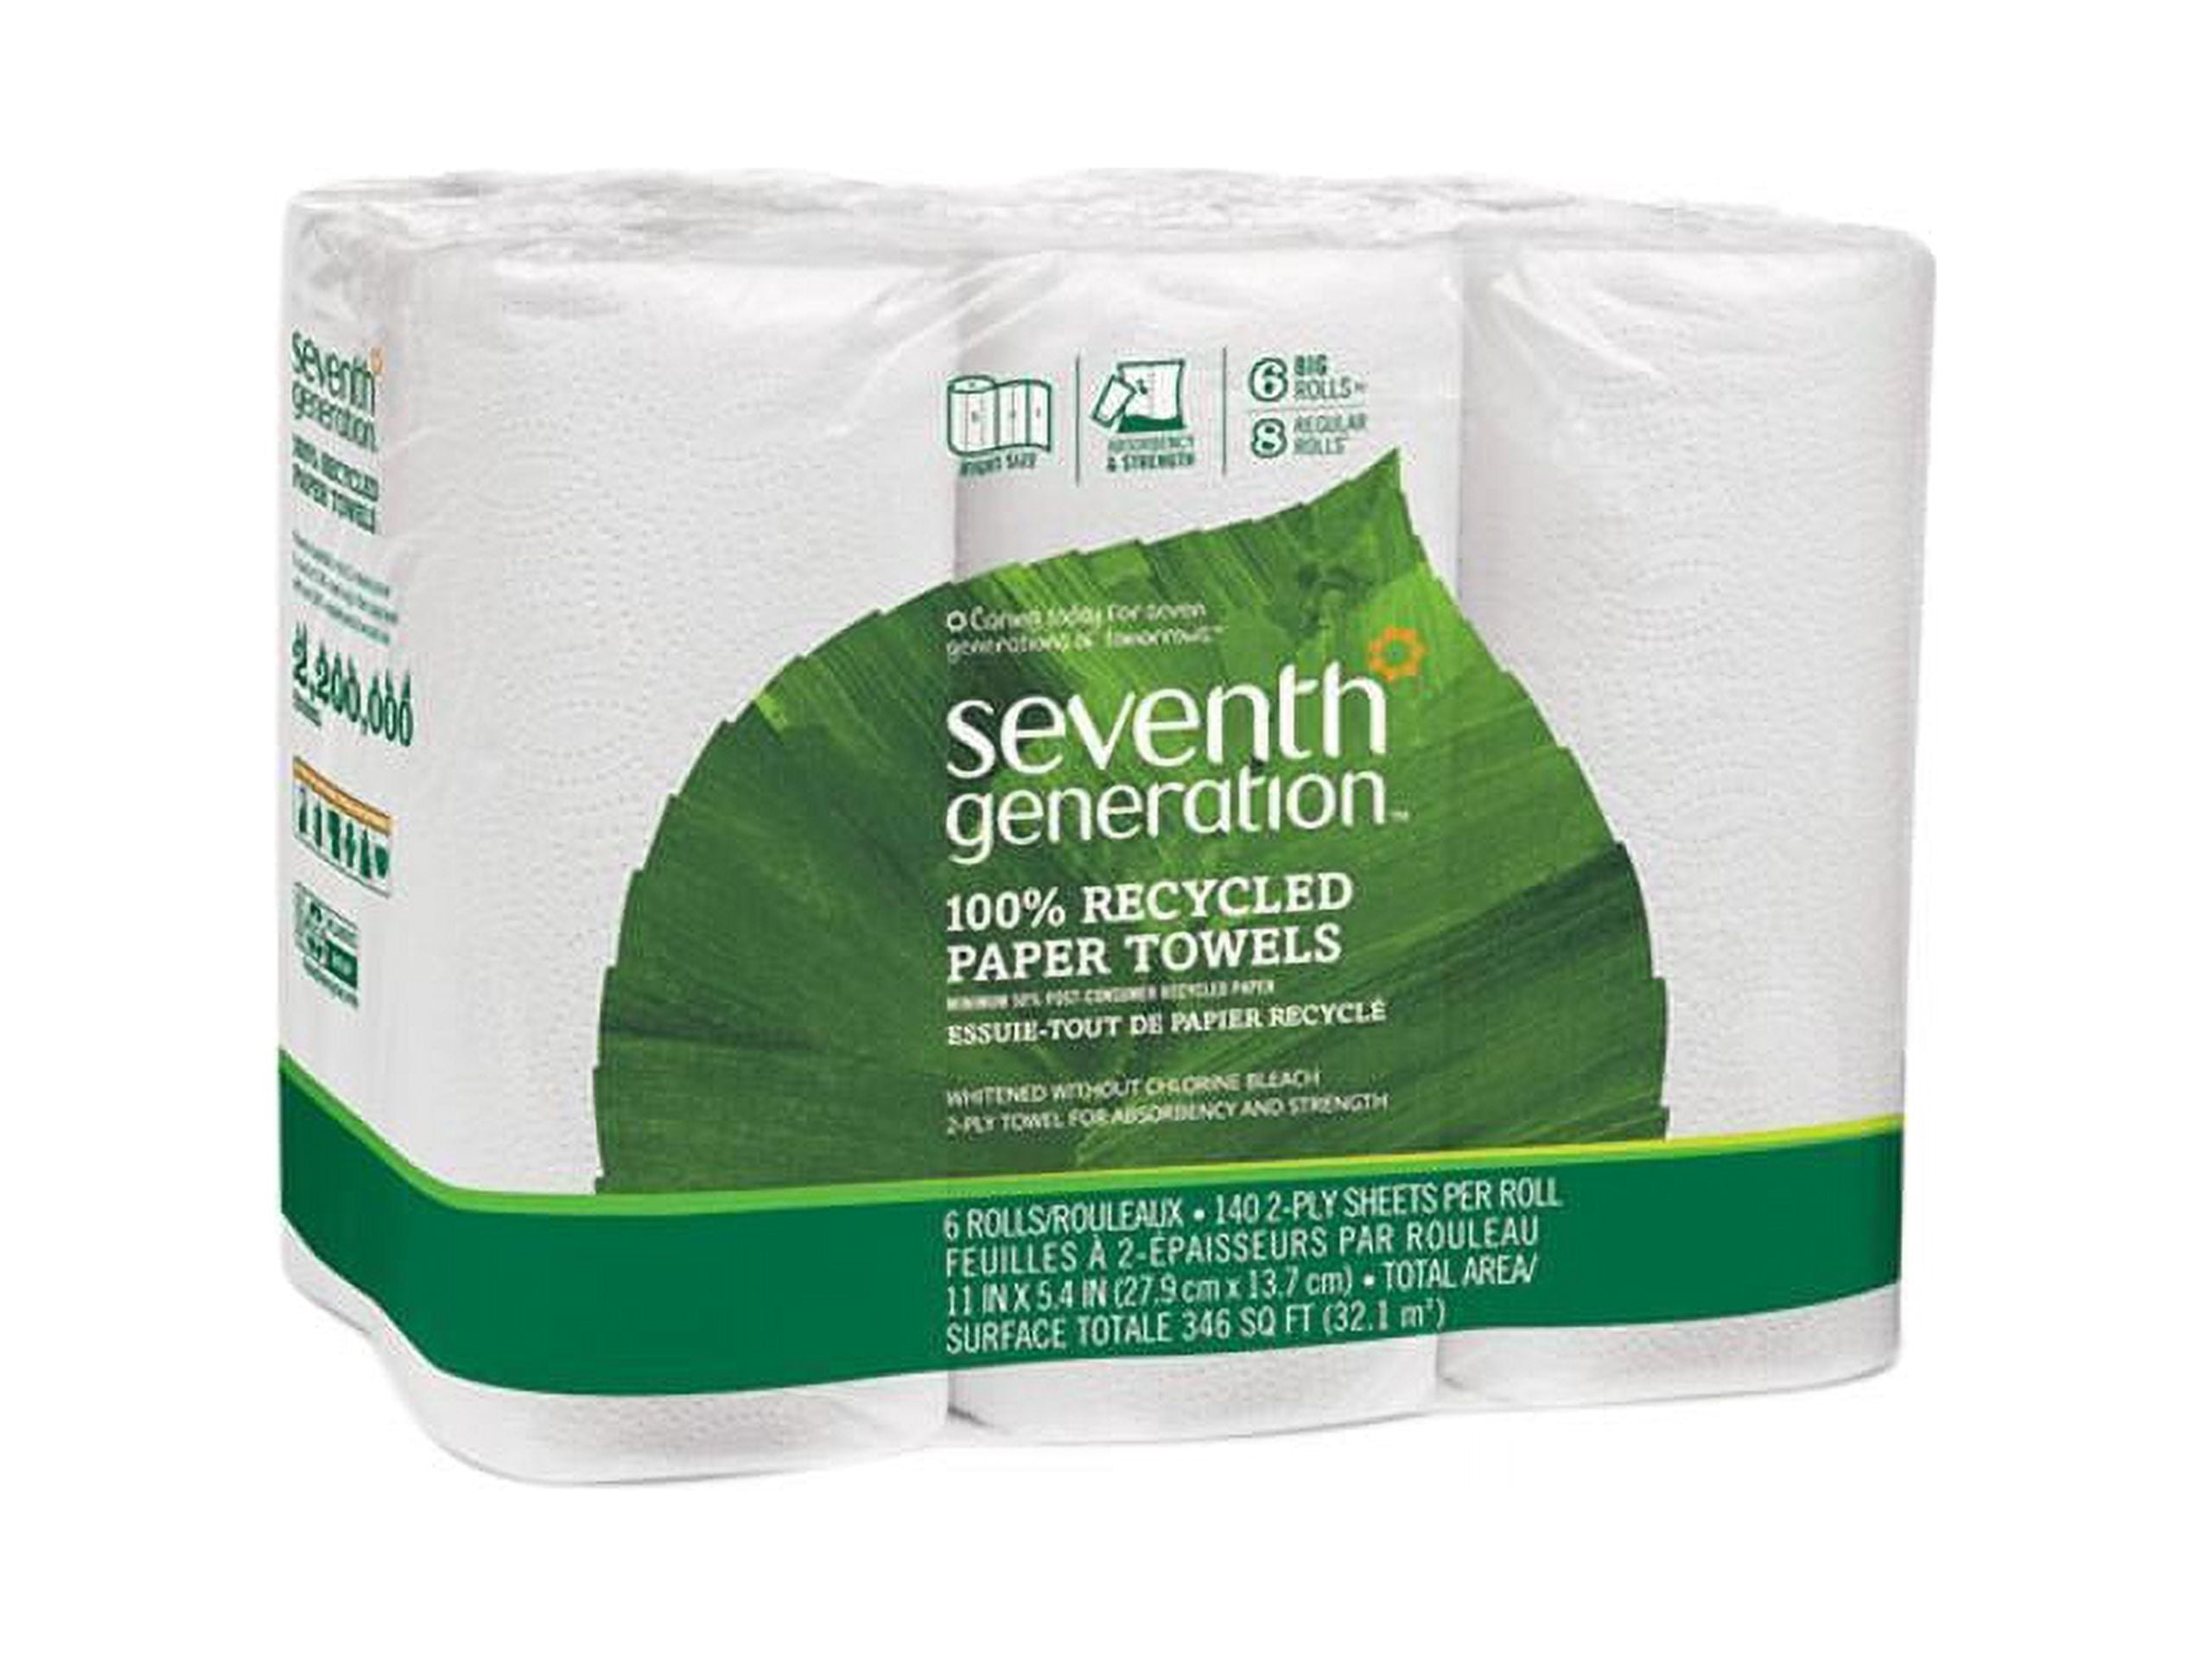 Dinner Napkins 2 Ply 100 Count at Whole Foods Market